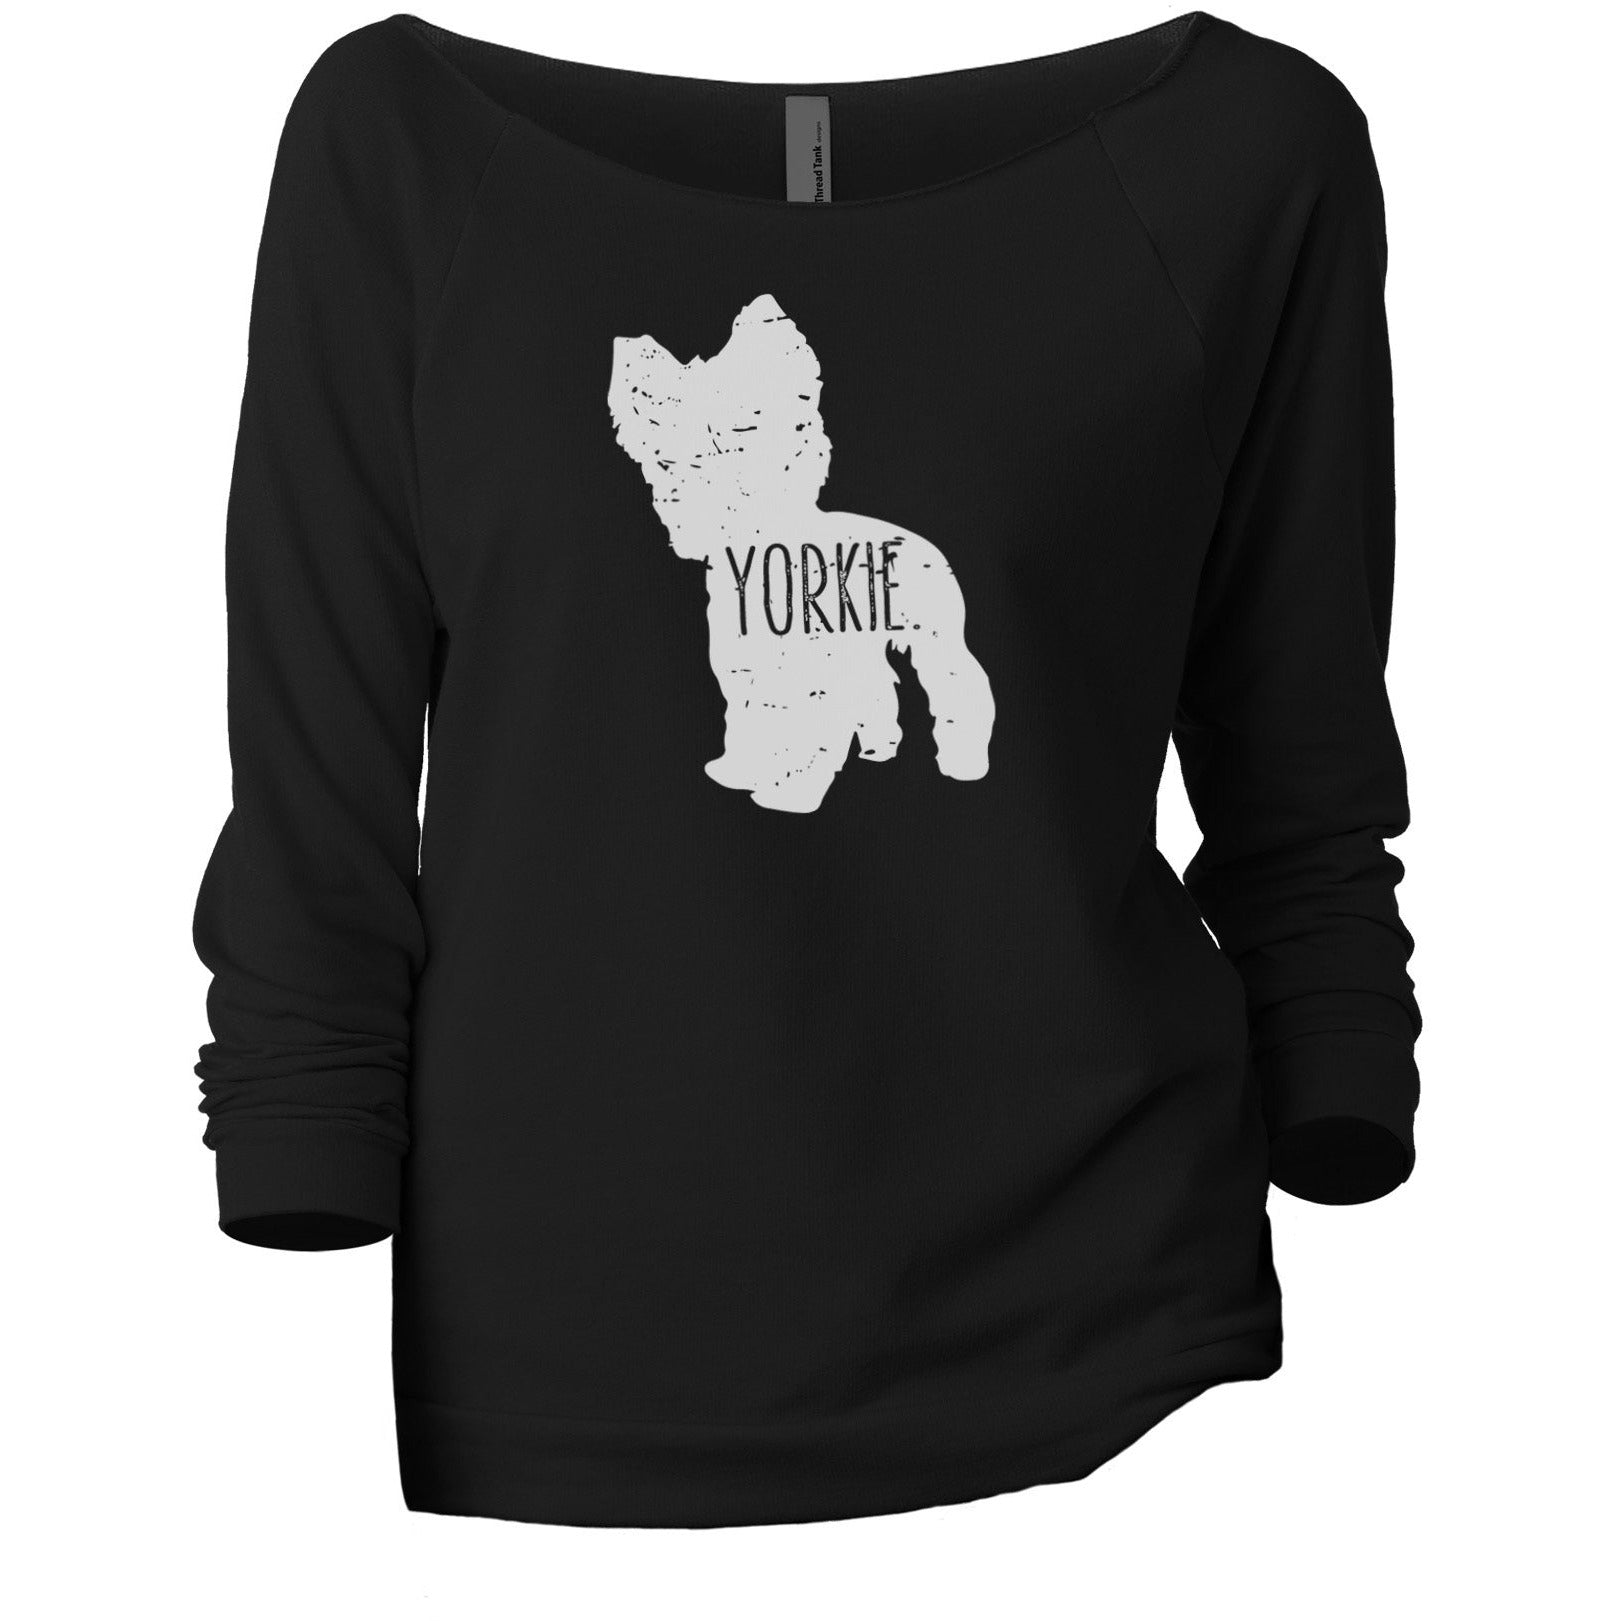 Yorkie Dog Silhouette - Stories You Can Wear